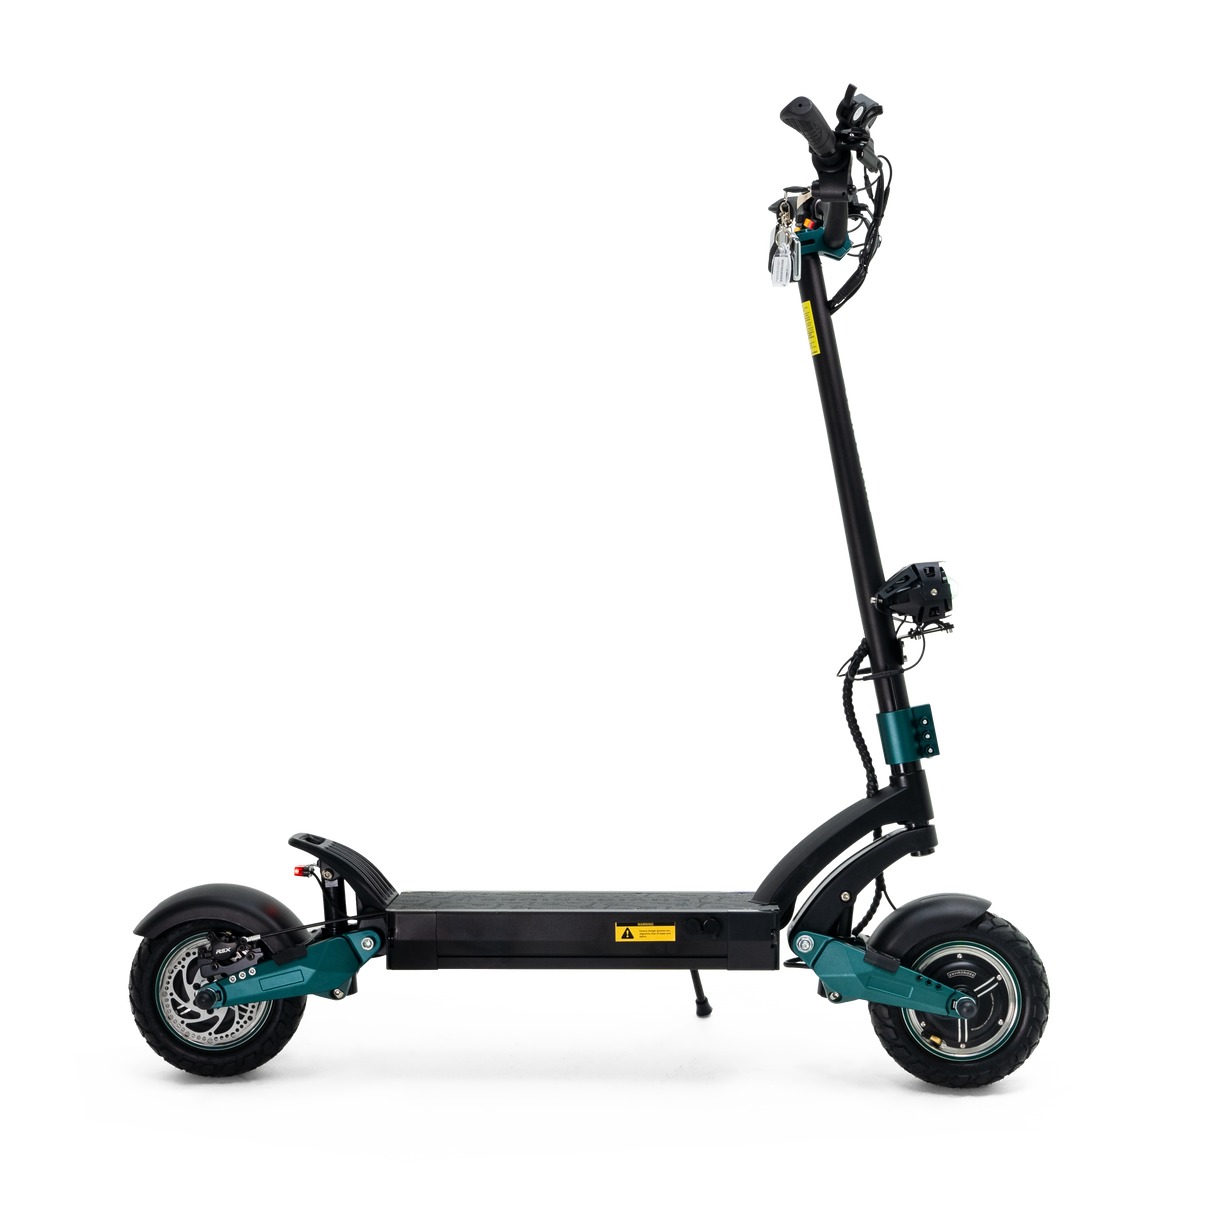 R1+ 2.0 Electric Scooter | [EnviroRides]